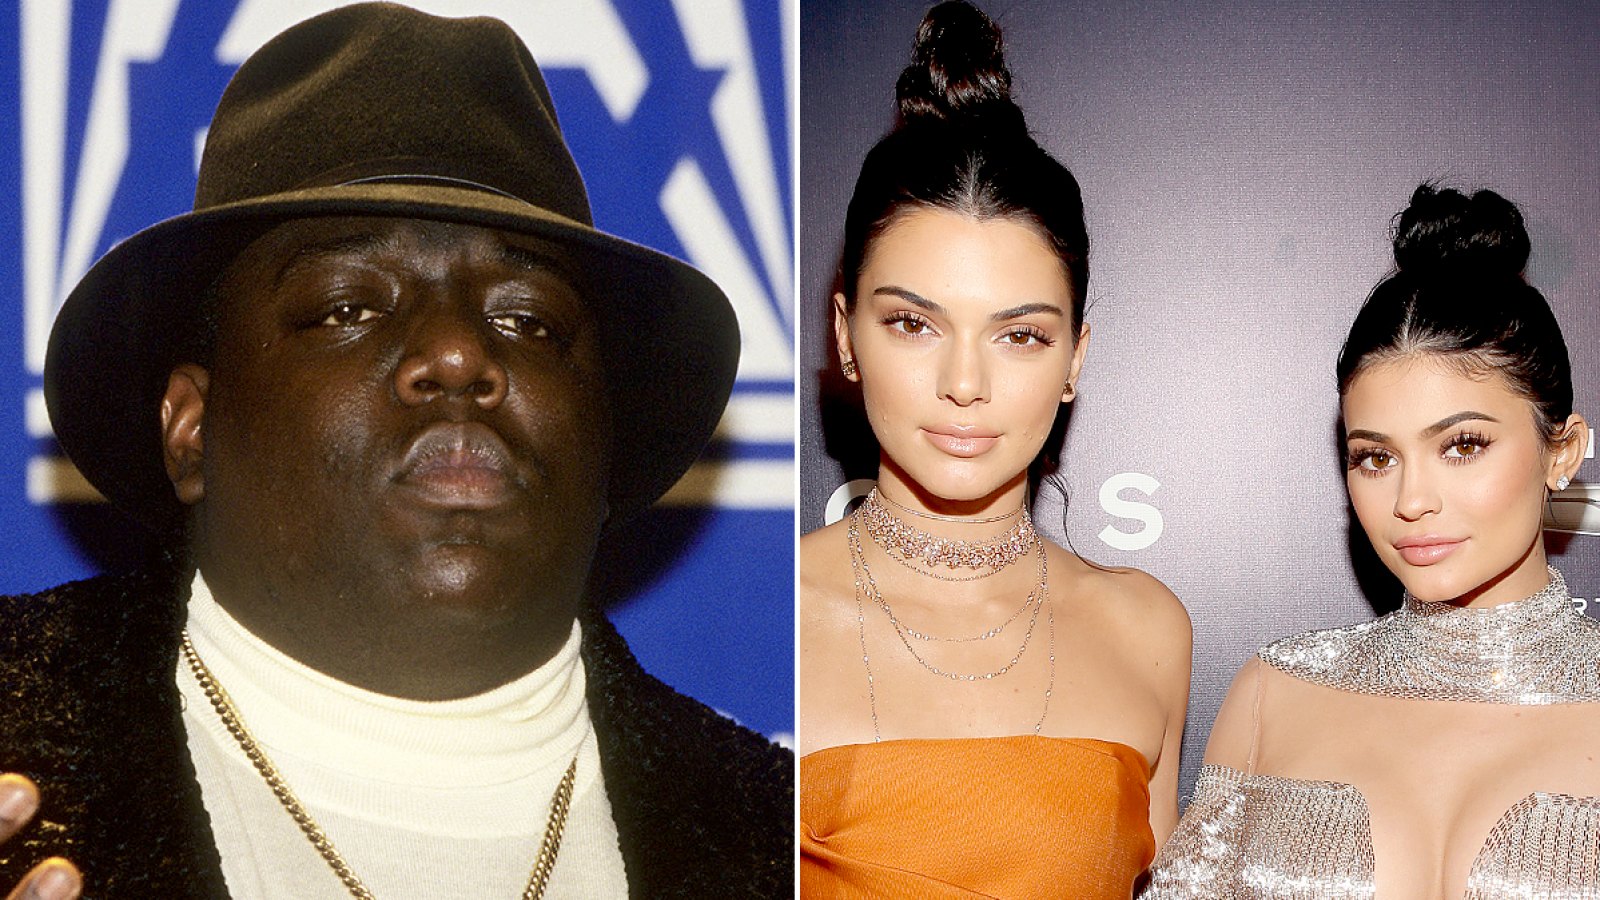 Notorious B.I.G. and Kendall and Kylie Jenner